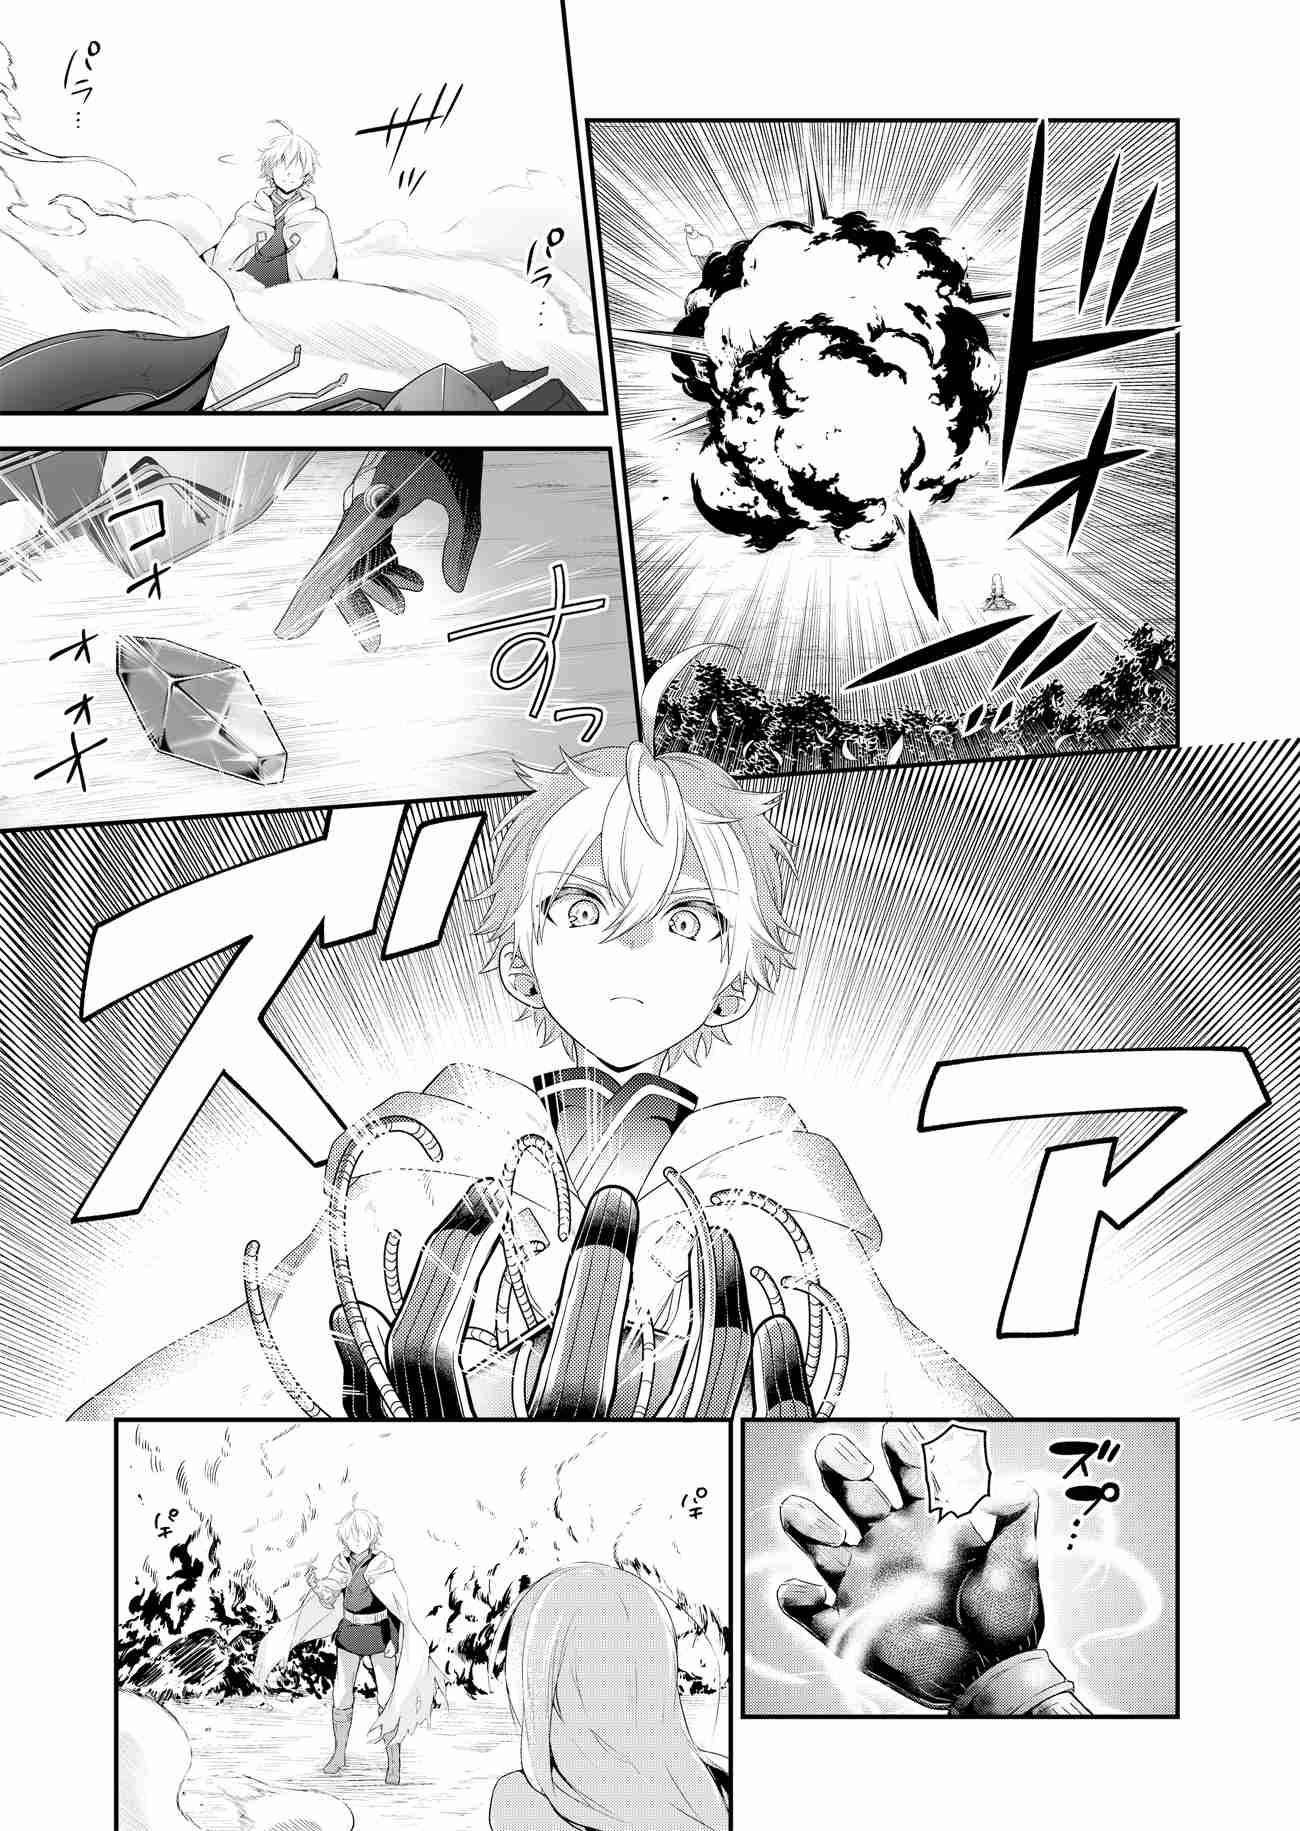 Metalial story Vol. 1 Ch. 3.1 (part two)